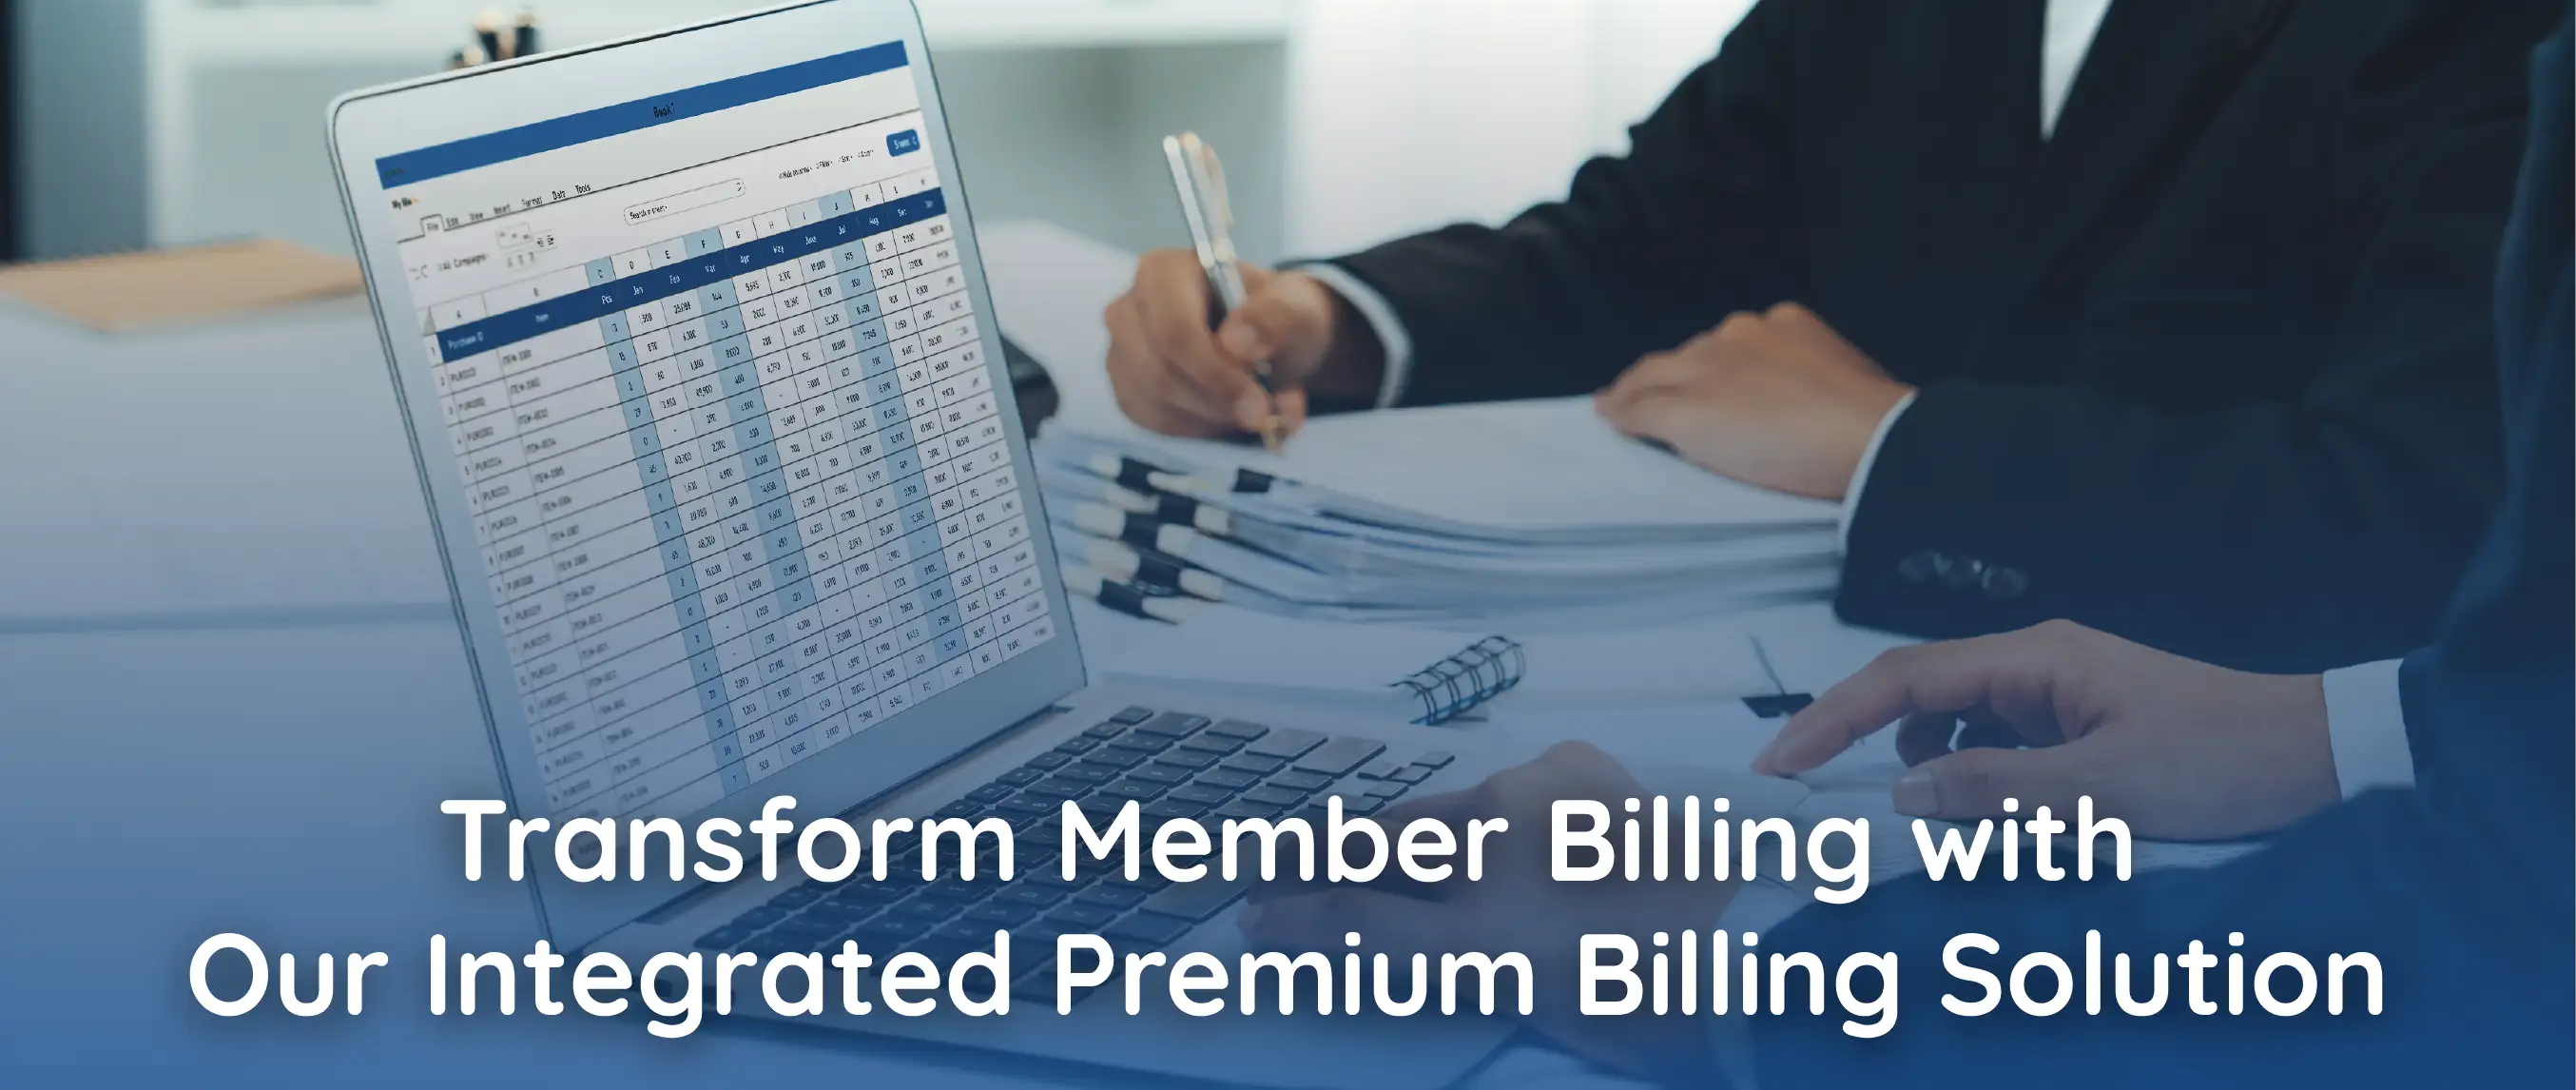 Transform Member Billing with Our Integrated Premium Billing Solution